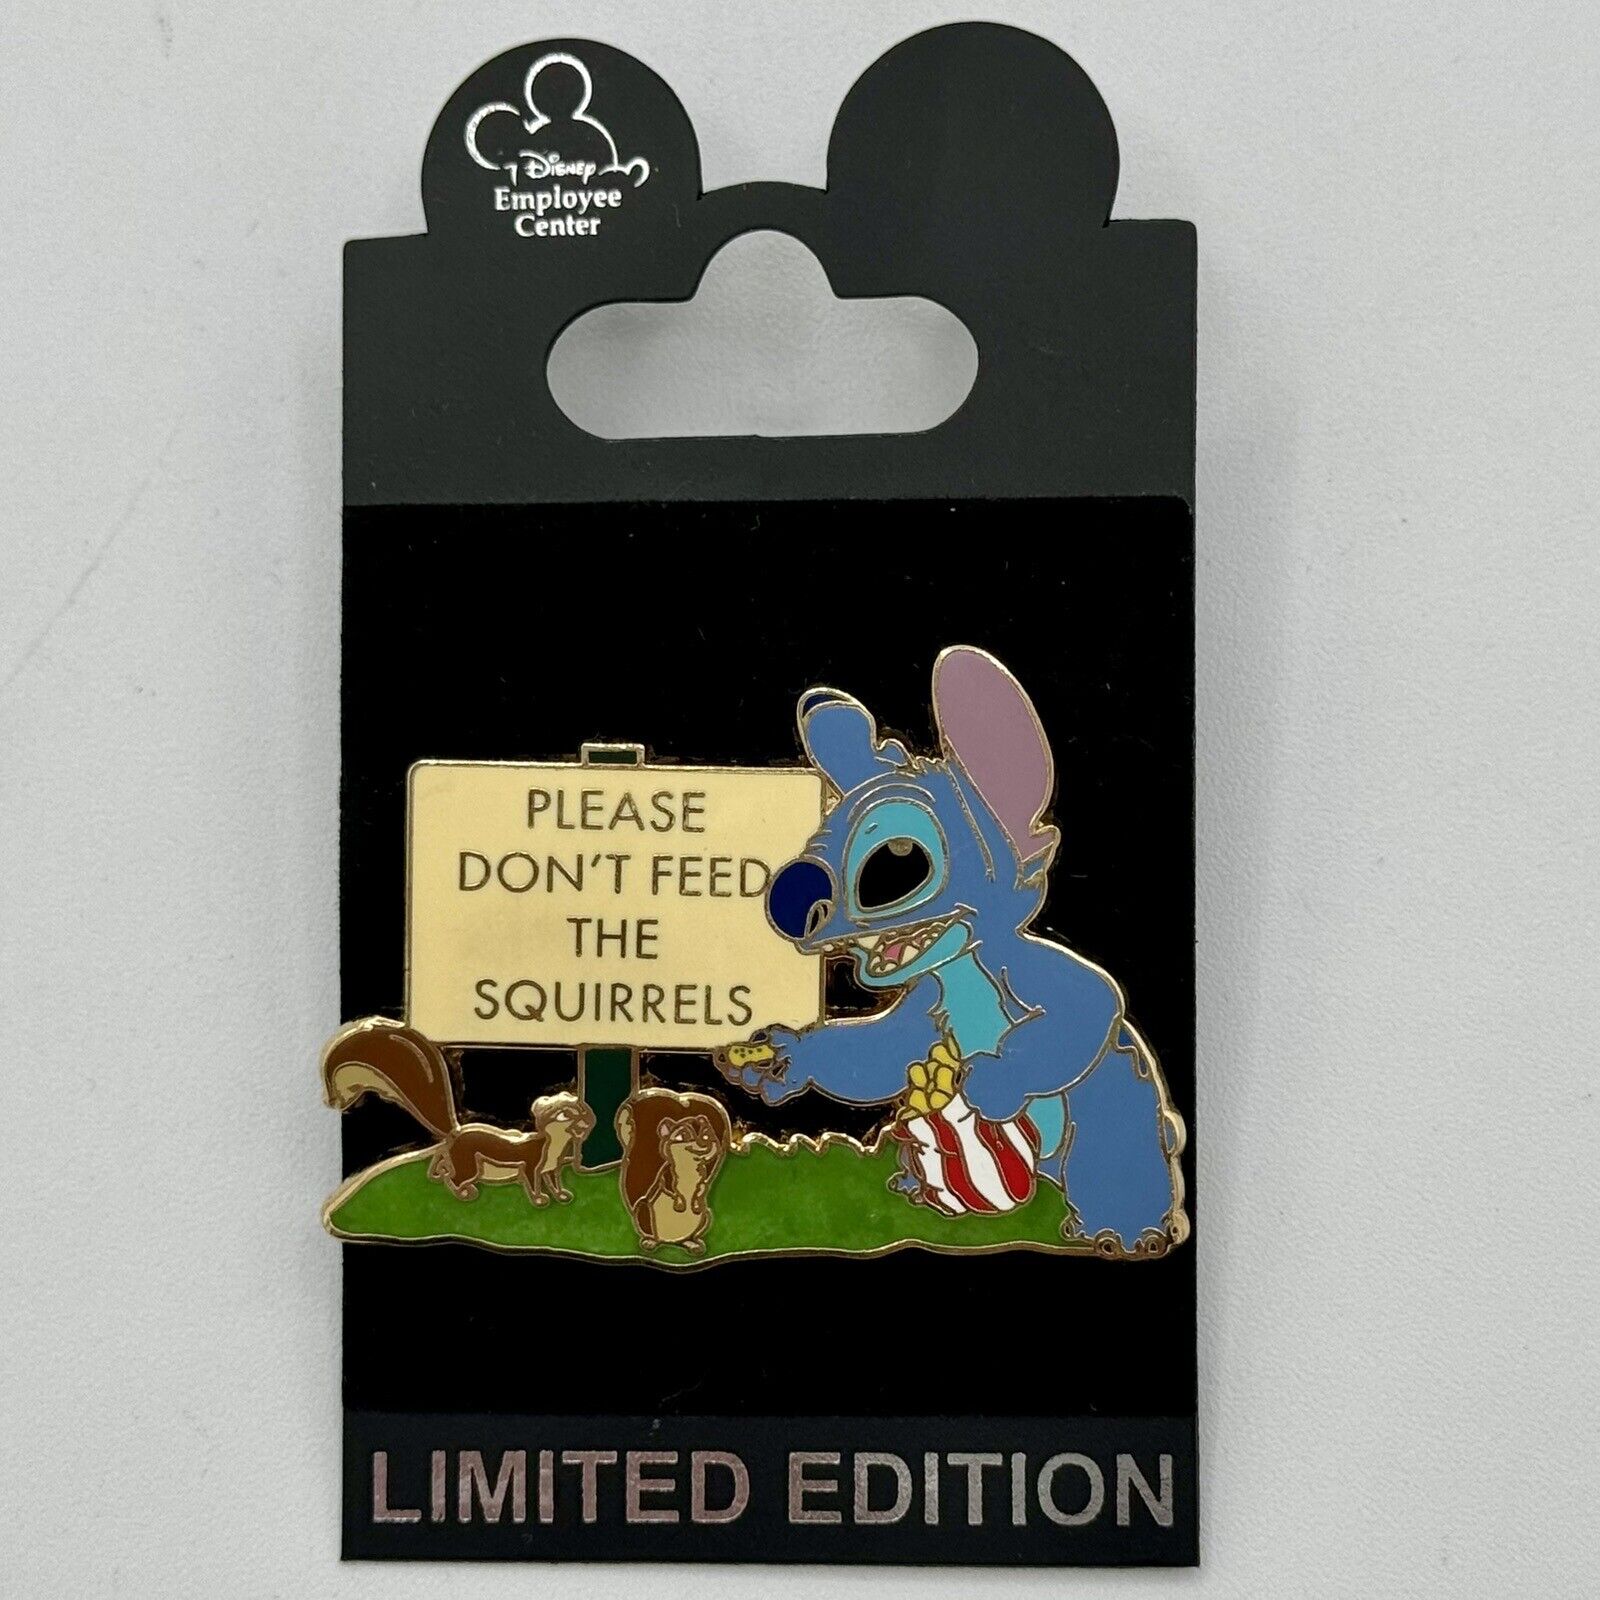 DEC Disney Pin LE 300 Employee Center STITCH Please Don’t Feed The Squirrels